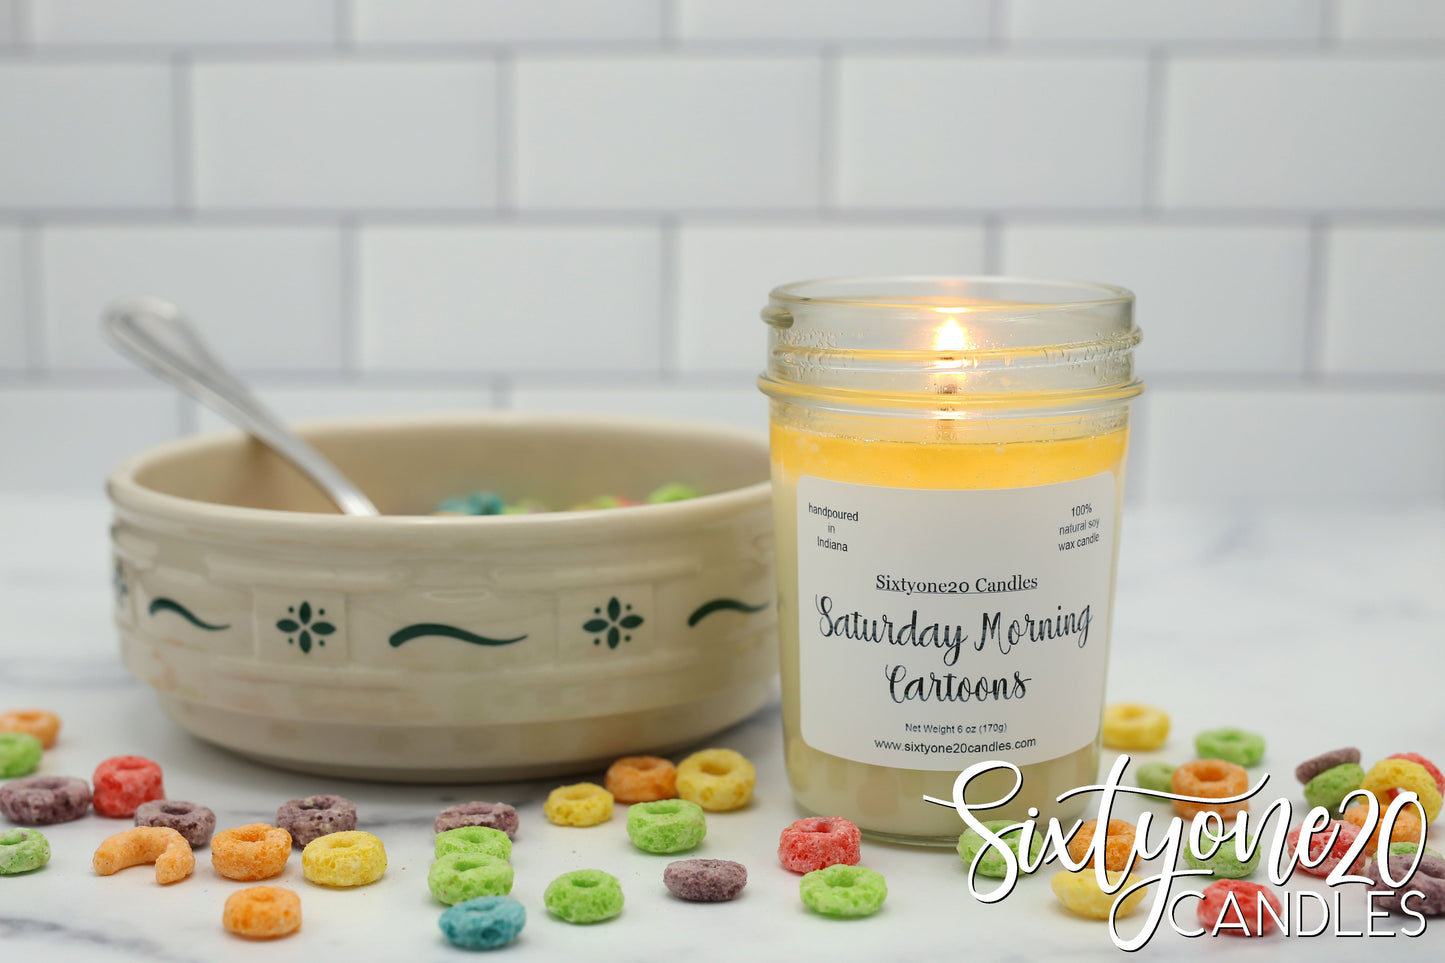 saturday morning cartoons soy wax candle smells just like your favorite fruit cereal